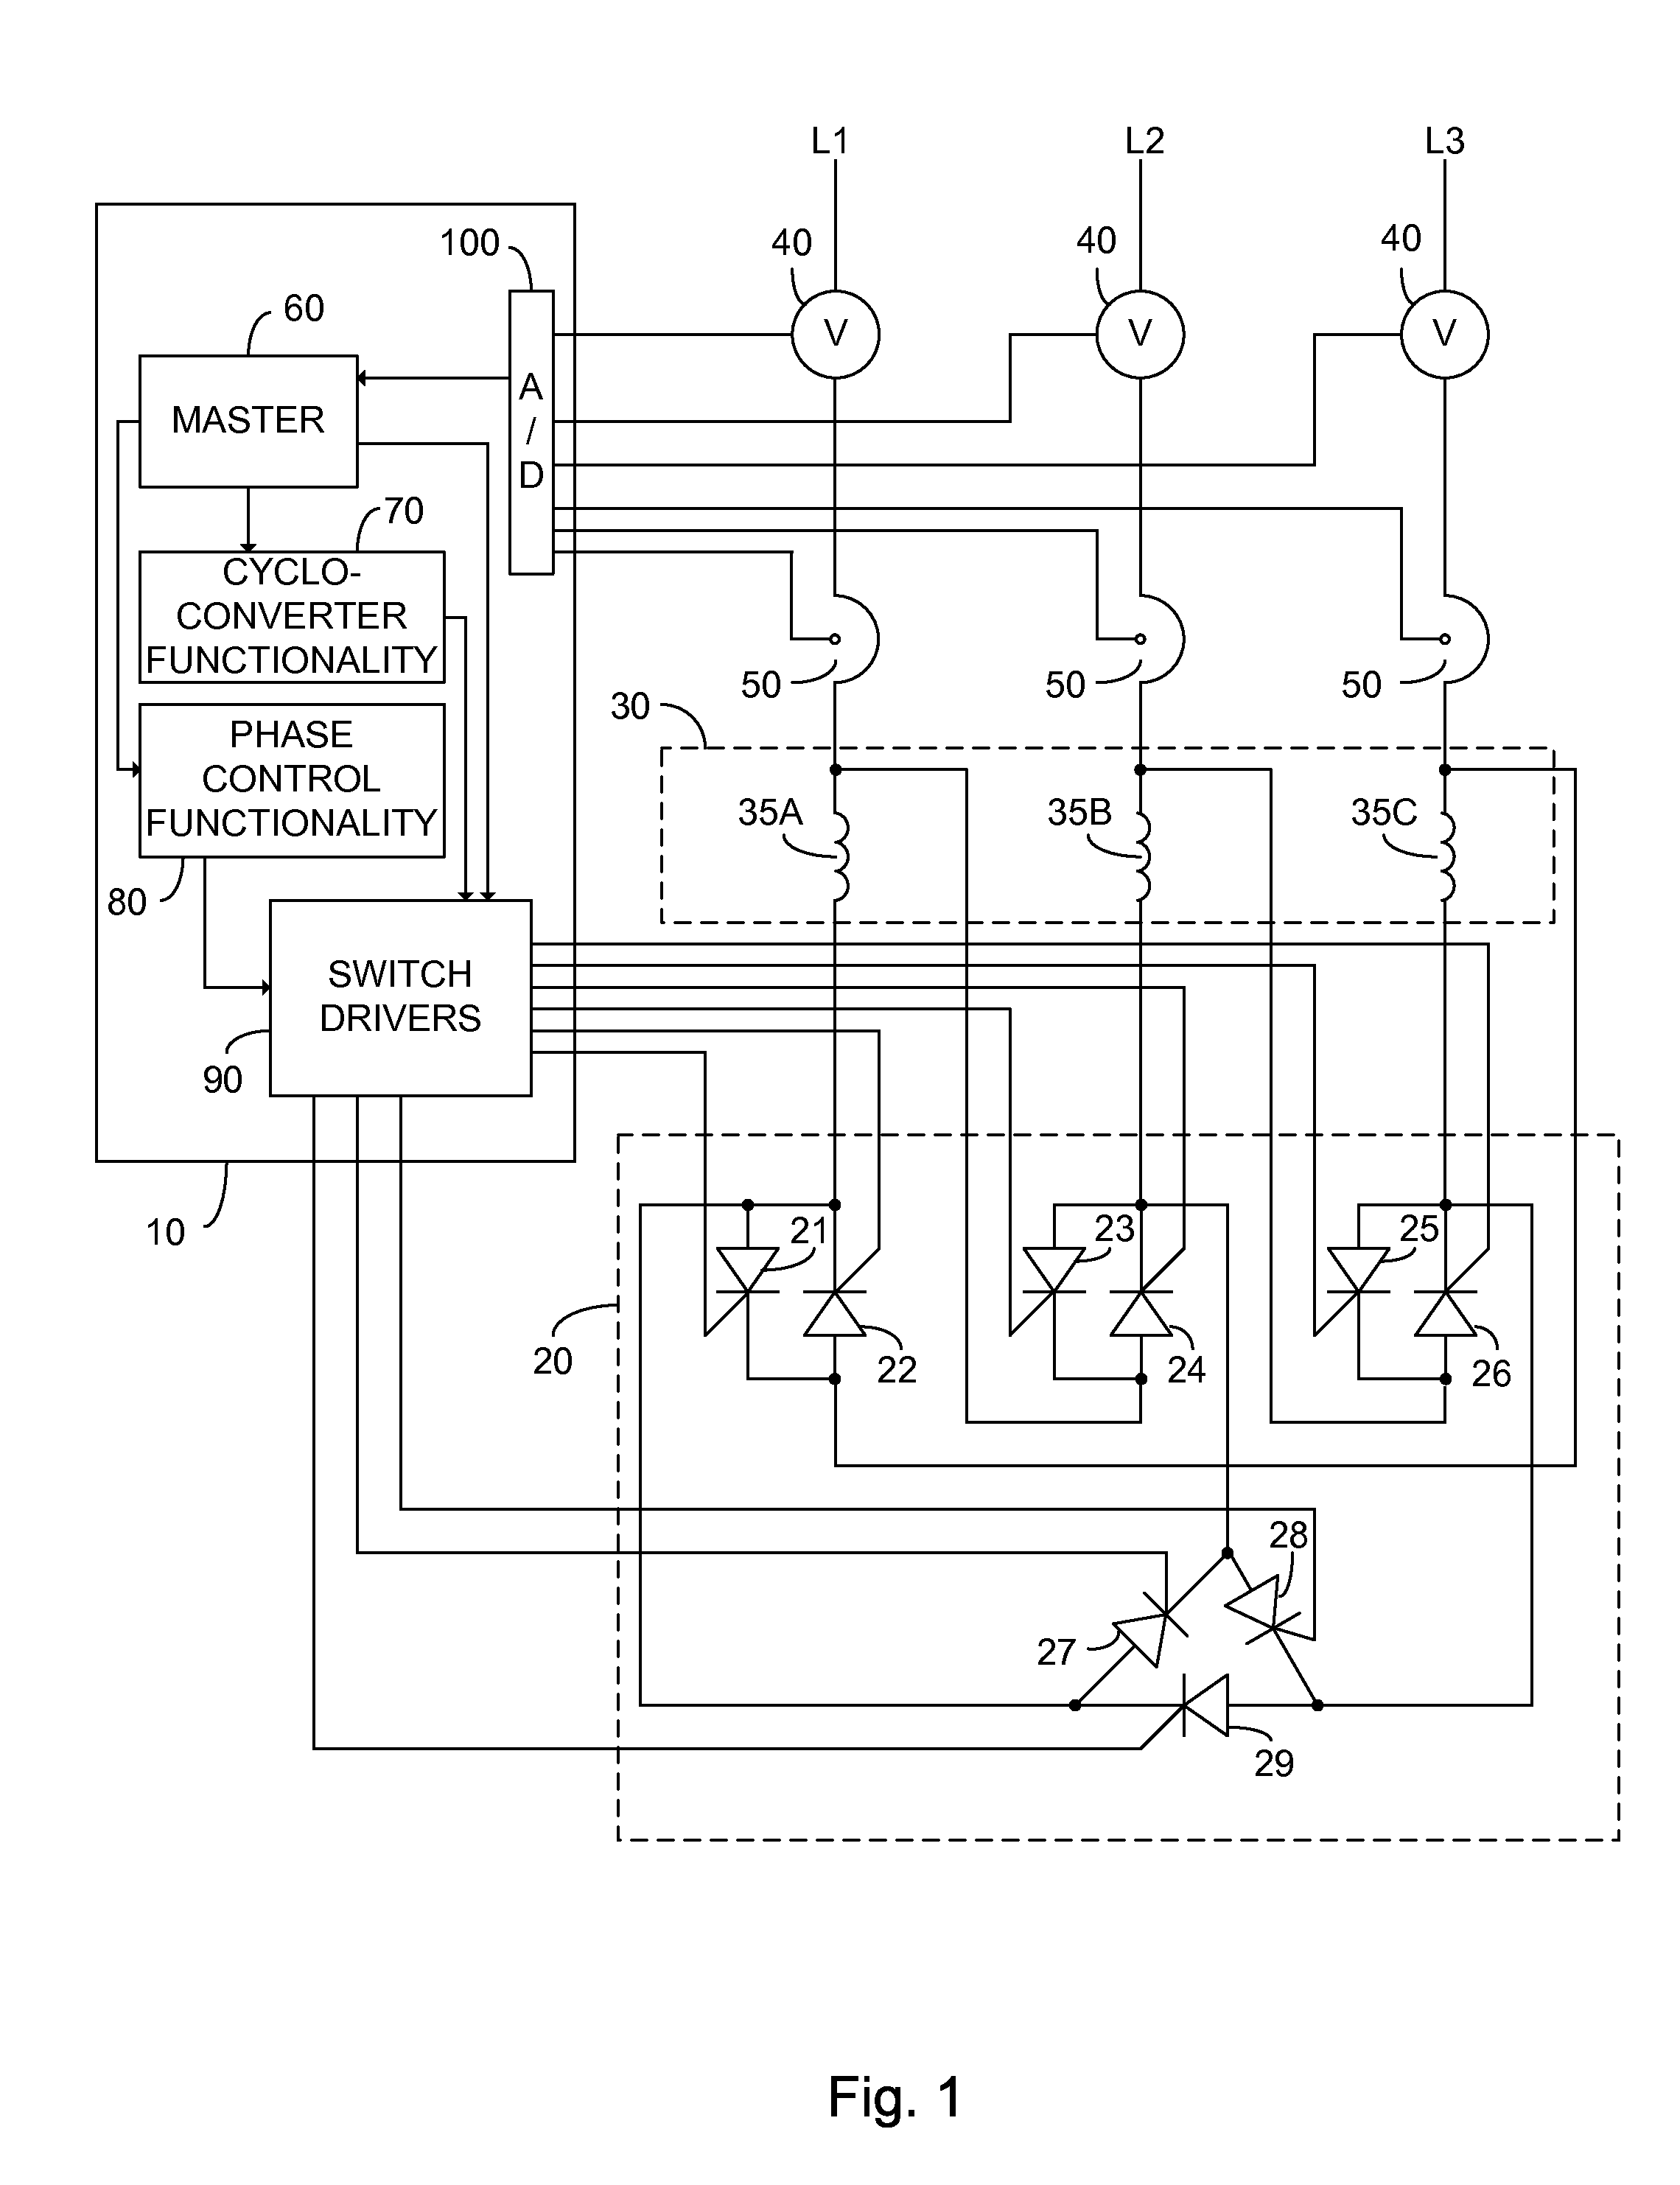 Method and apparatus for AC motor control